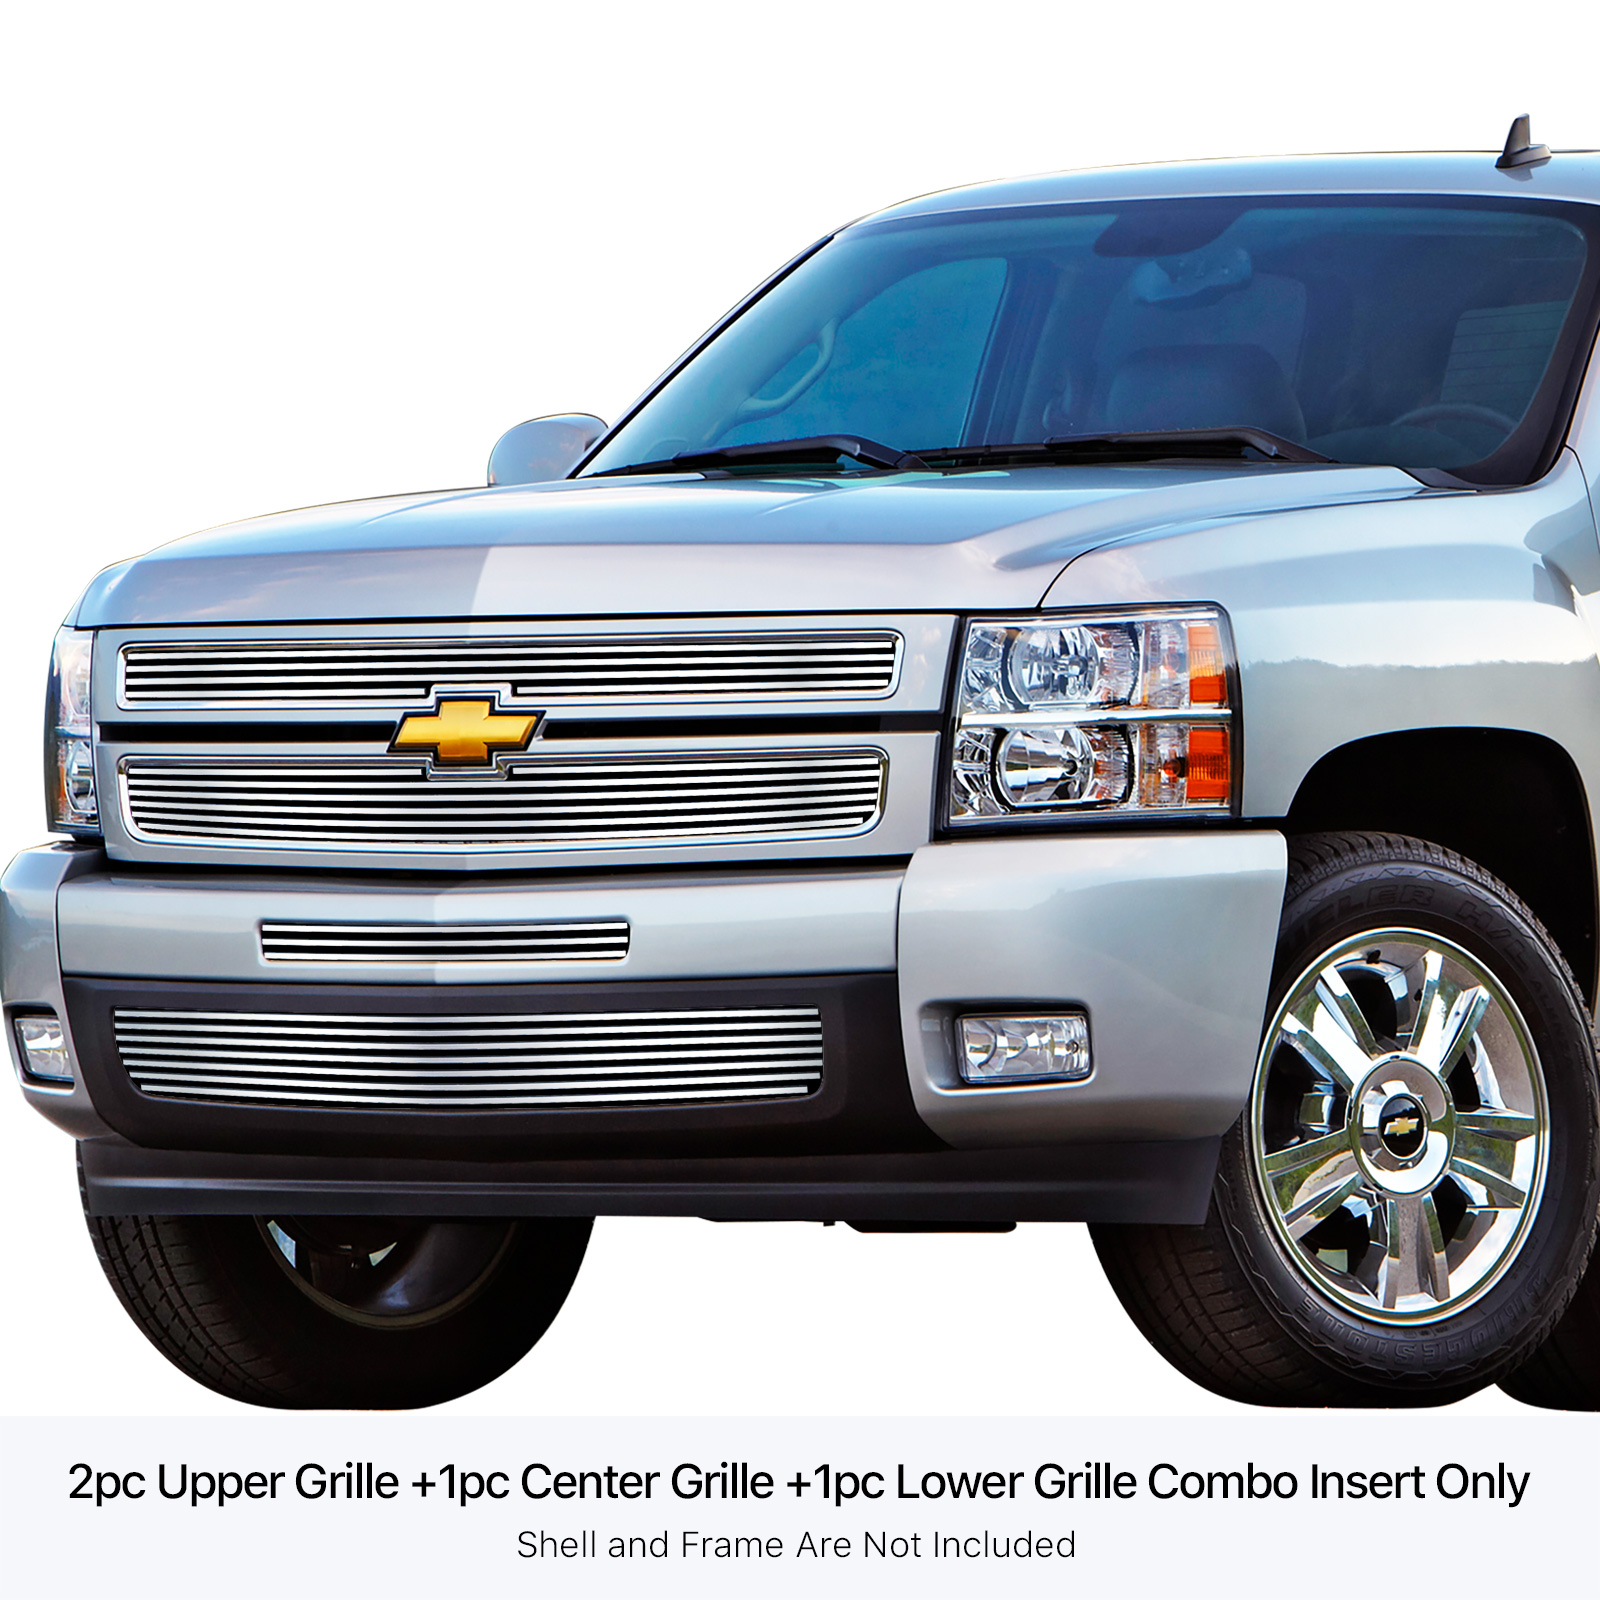 2007-2013 Chevy Silverado 1500 only for models with logo height exceeding center bar MAIN UPPER + LOWER BUMPER Stainless Steel Billet Grille